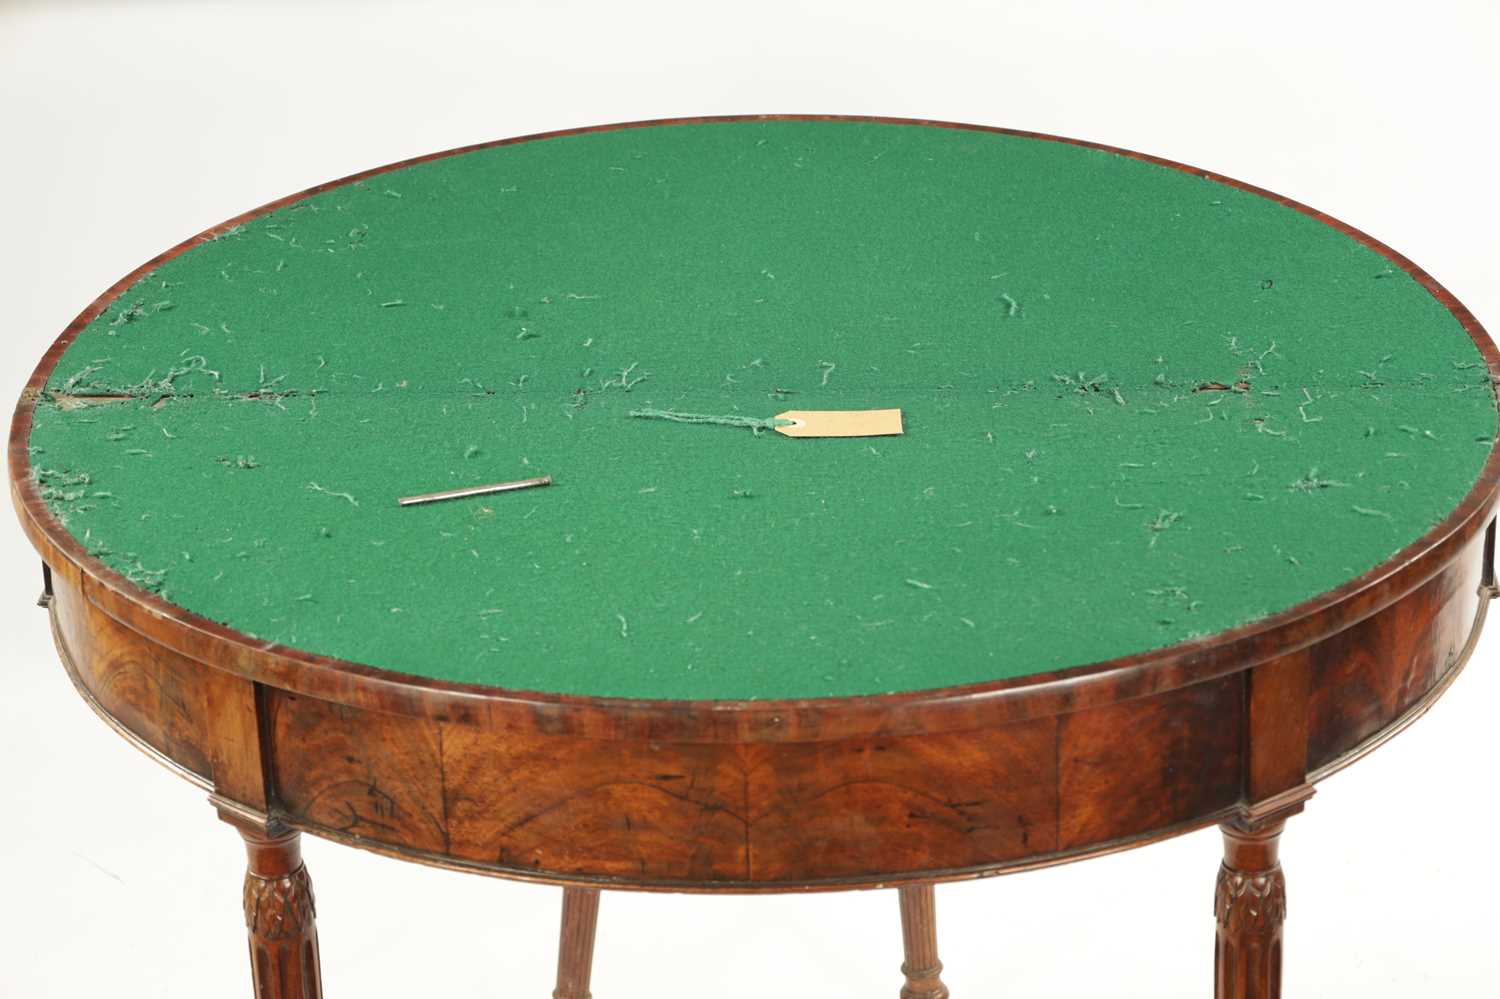 A LATE 18TH CENTURY DEMI LUNE CARD TABLE ON FLUTED LEGS IN THE MANNER OF GILLOWS - Image 7 of 7